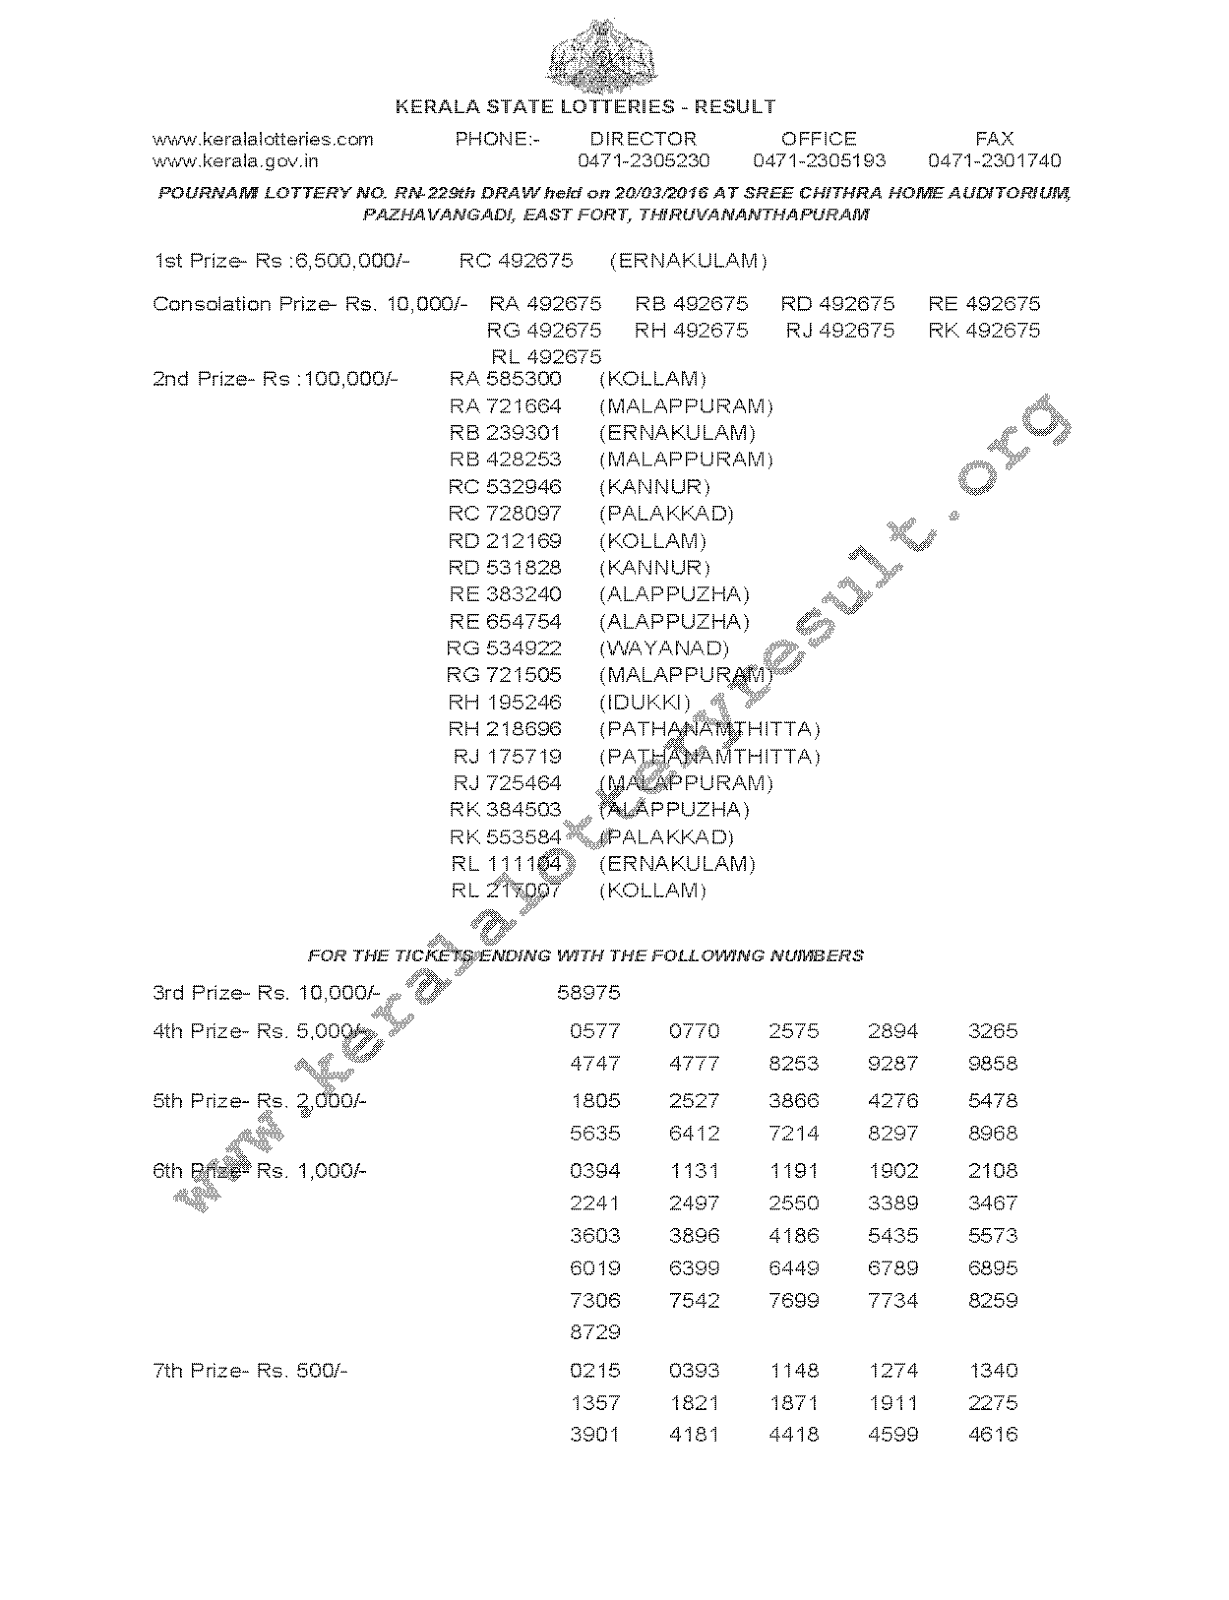 POURNAMI Lottery RN 229 Result 20-3-2016